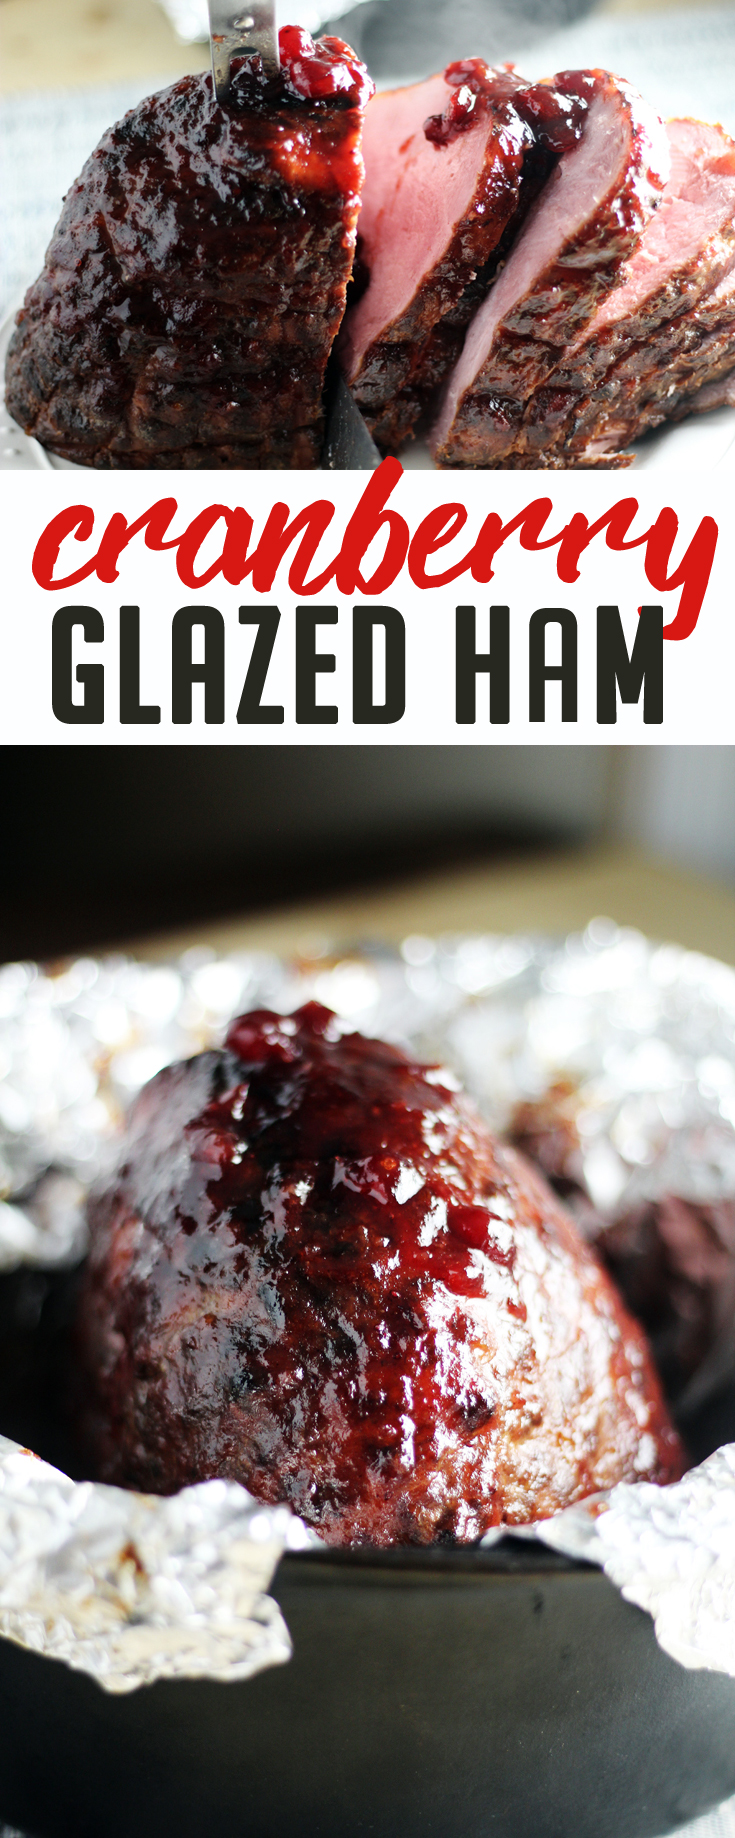 Make a Cranberry Glazed Ham Your Family Will Never Forget | Buy This ...